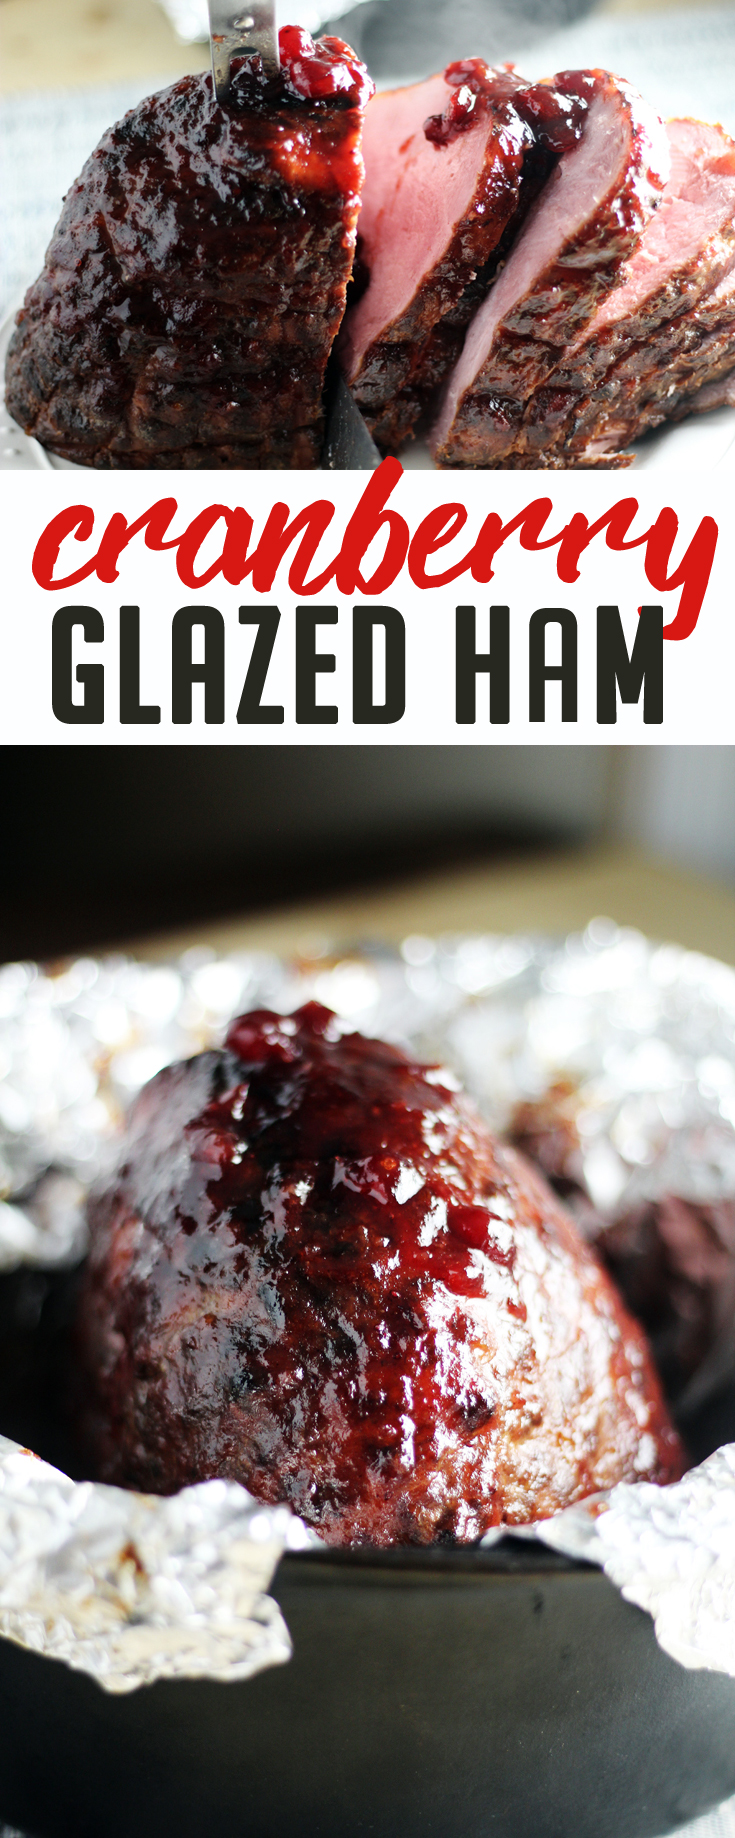 Make a Cranberry Glazed Ham Your Family Will Never Forget | Buy This ...